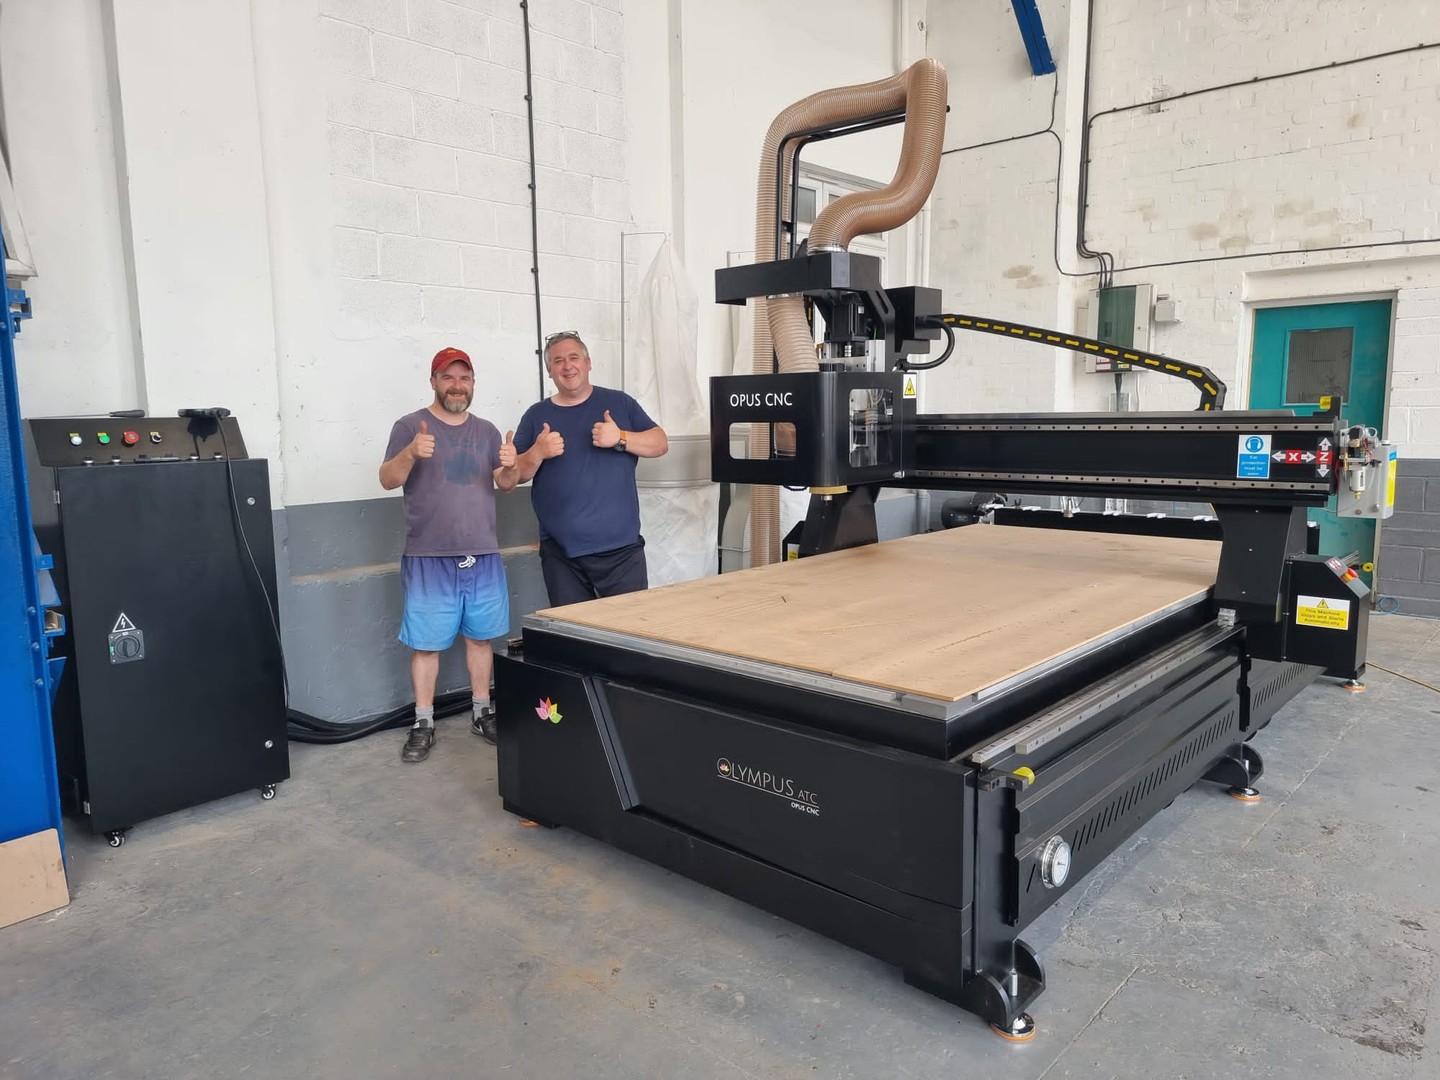 Olympus ATC CNC Router Installation in Wolverhampton